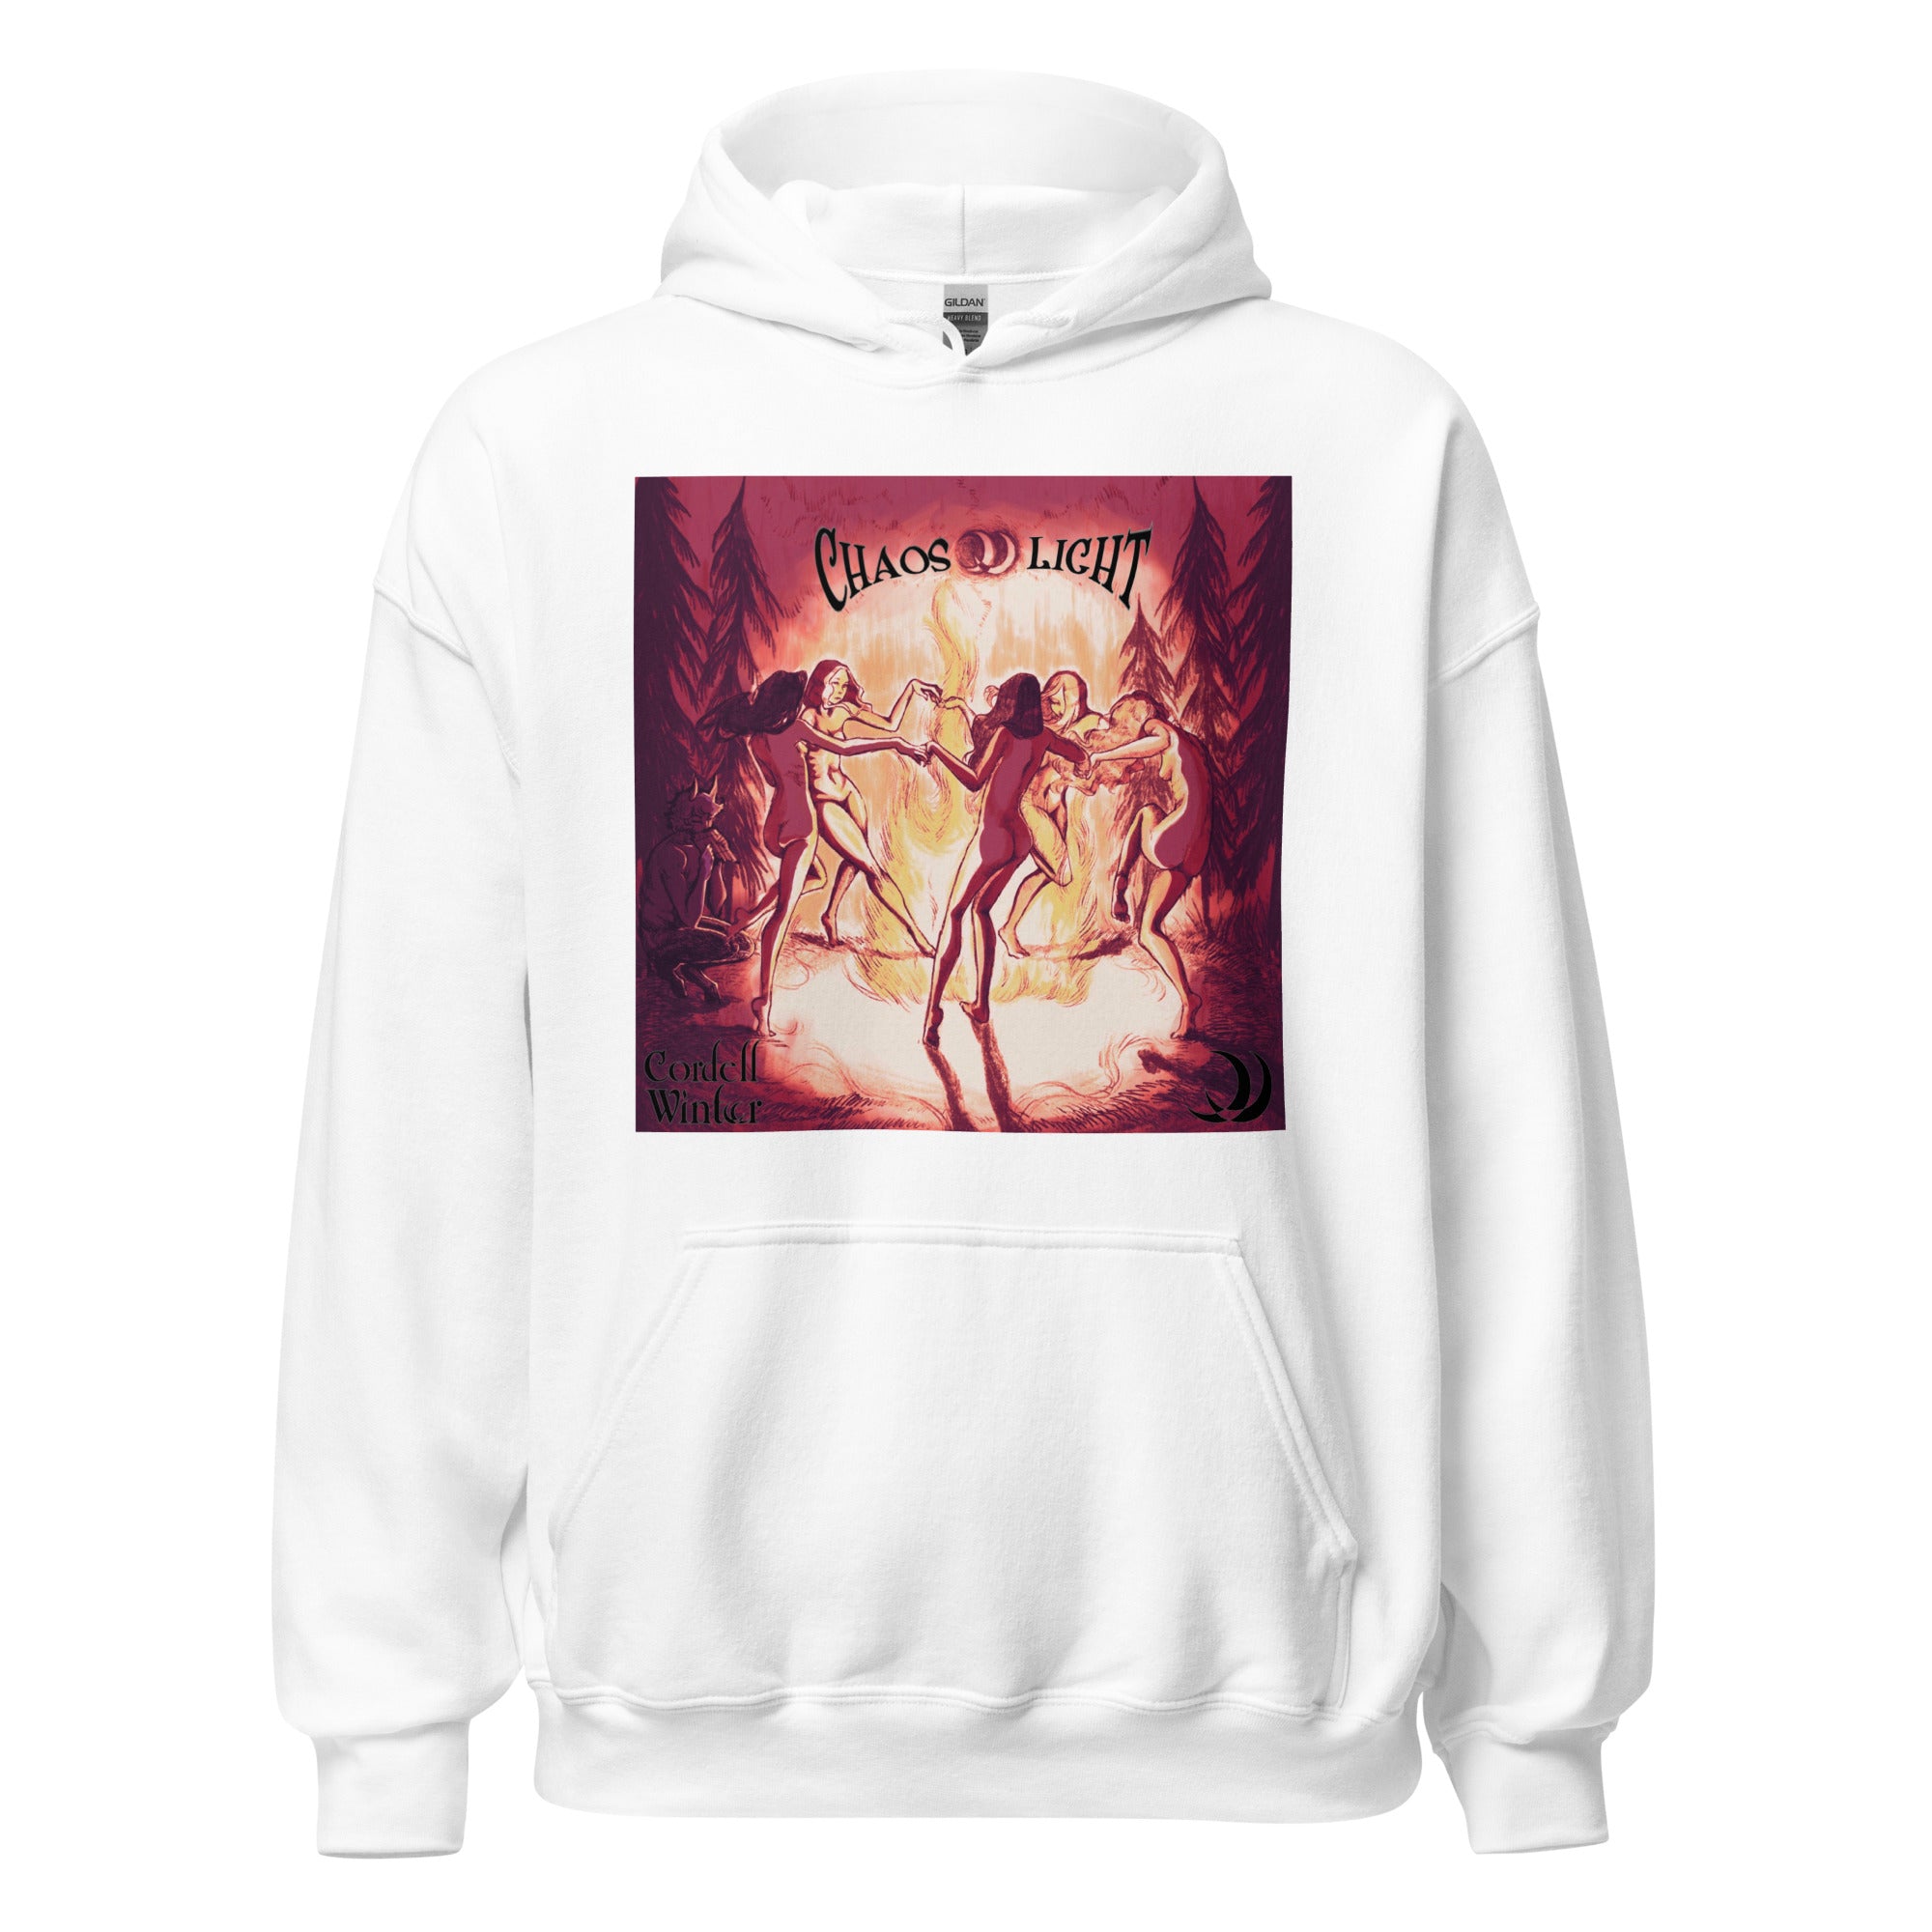 Cordell Winter - "Chaos In Light" - Unisex Hoodie